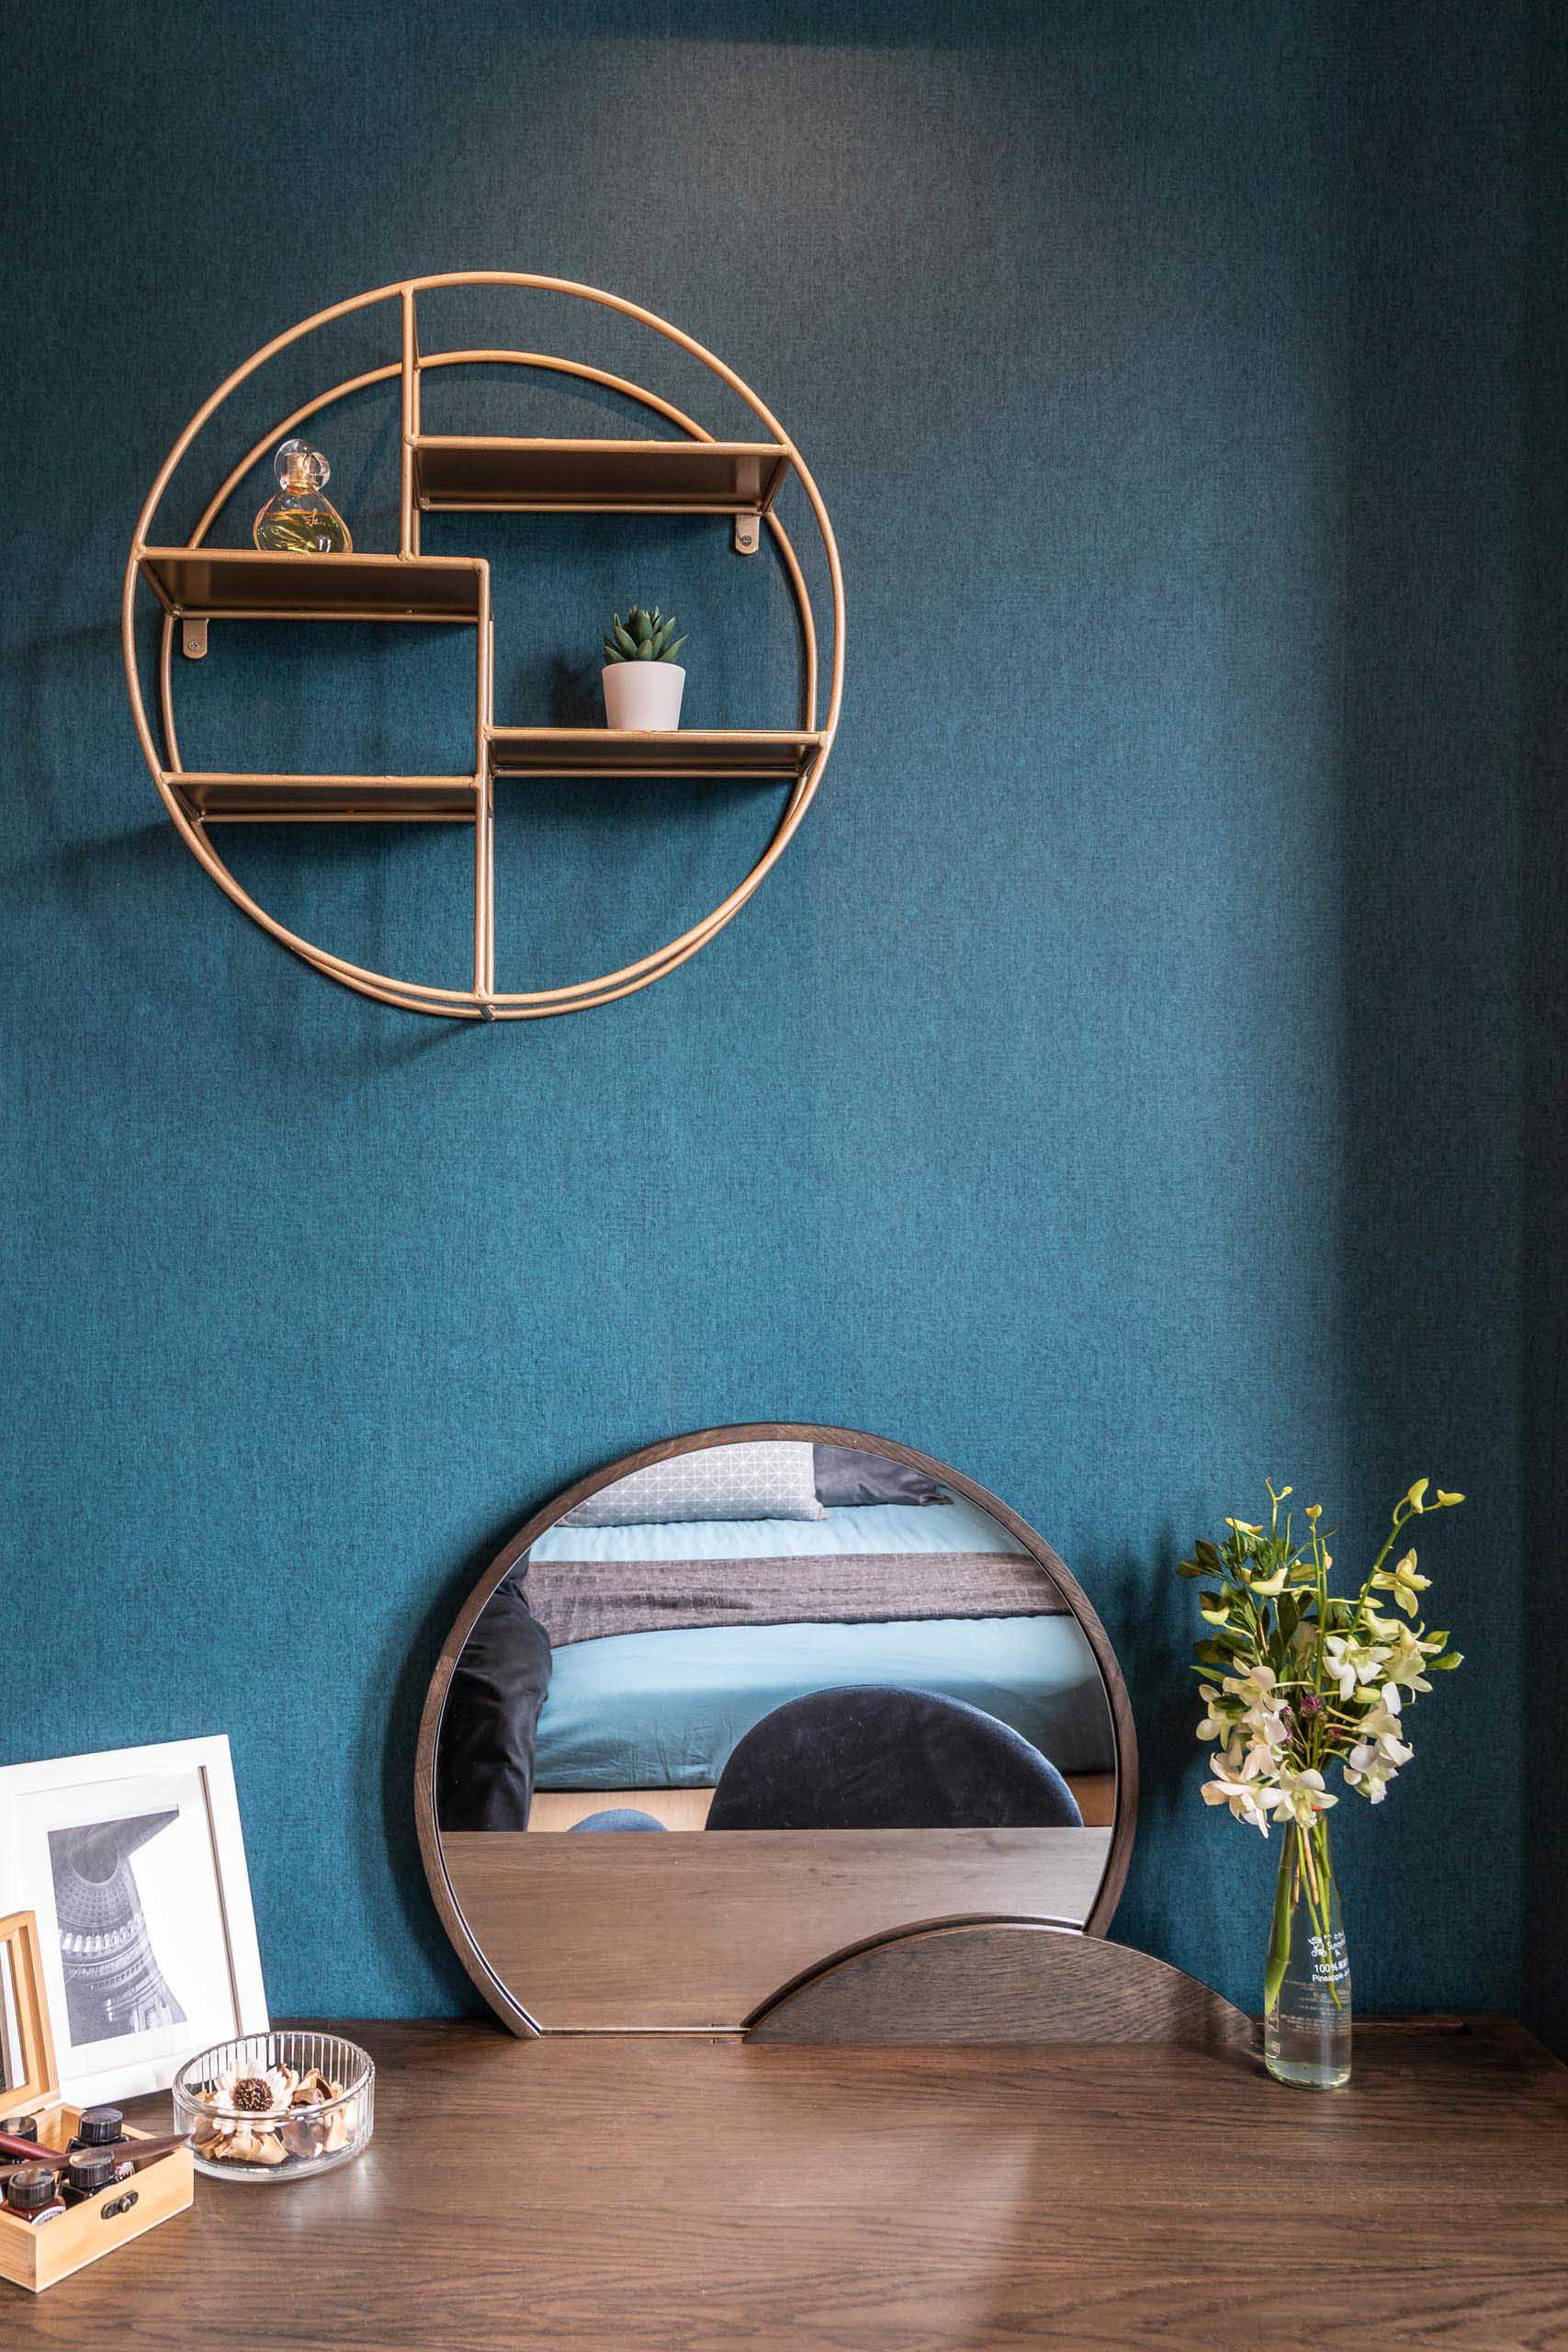 A small desk area with a textured blue wallpaper.